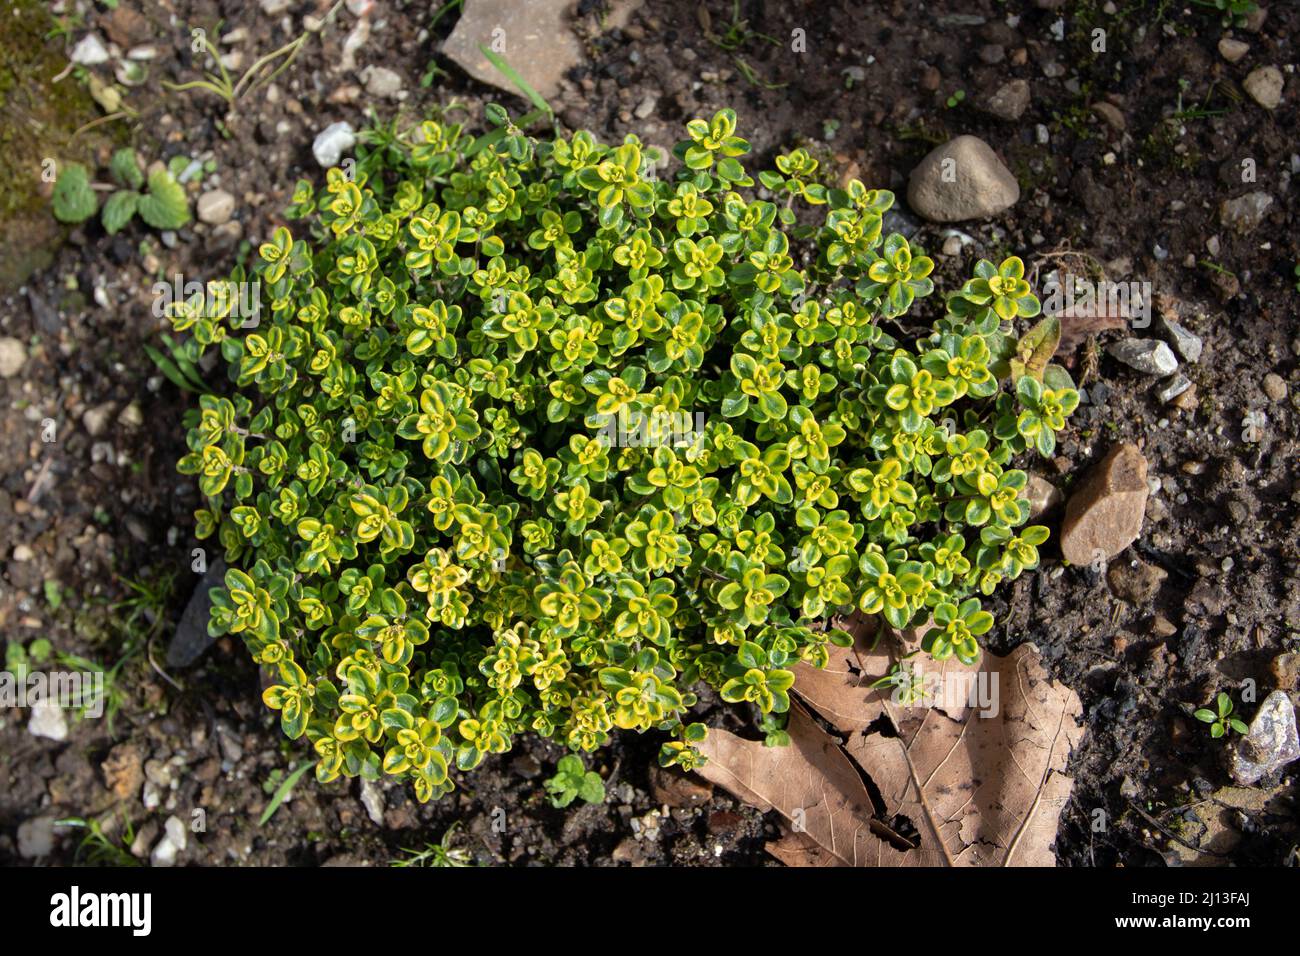 Thymus citriodorus plant top view. Lemon or citrus thyme decorative bush with variegated leaves. Stock Photo